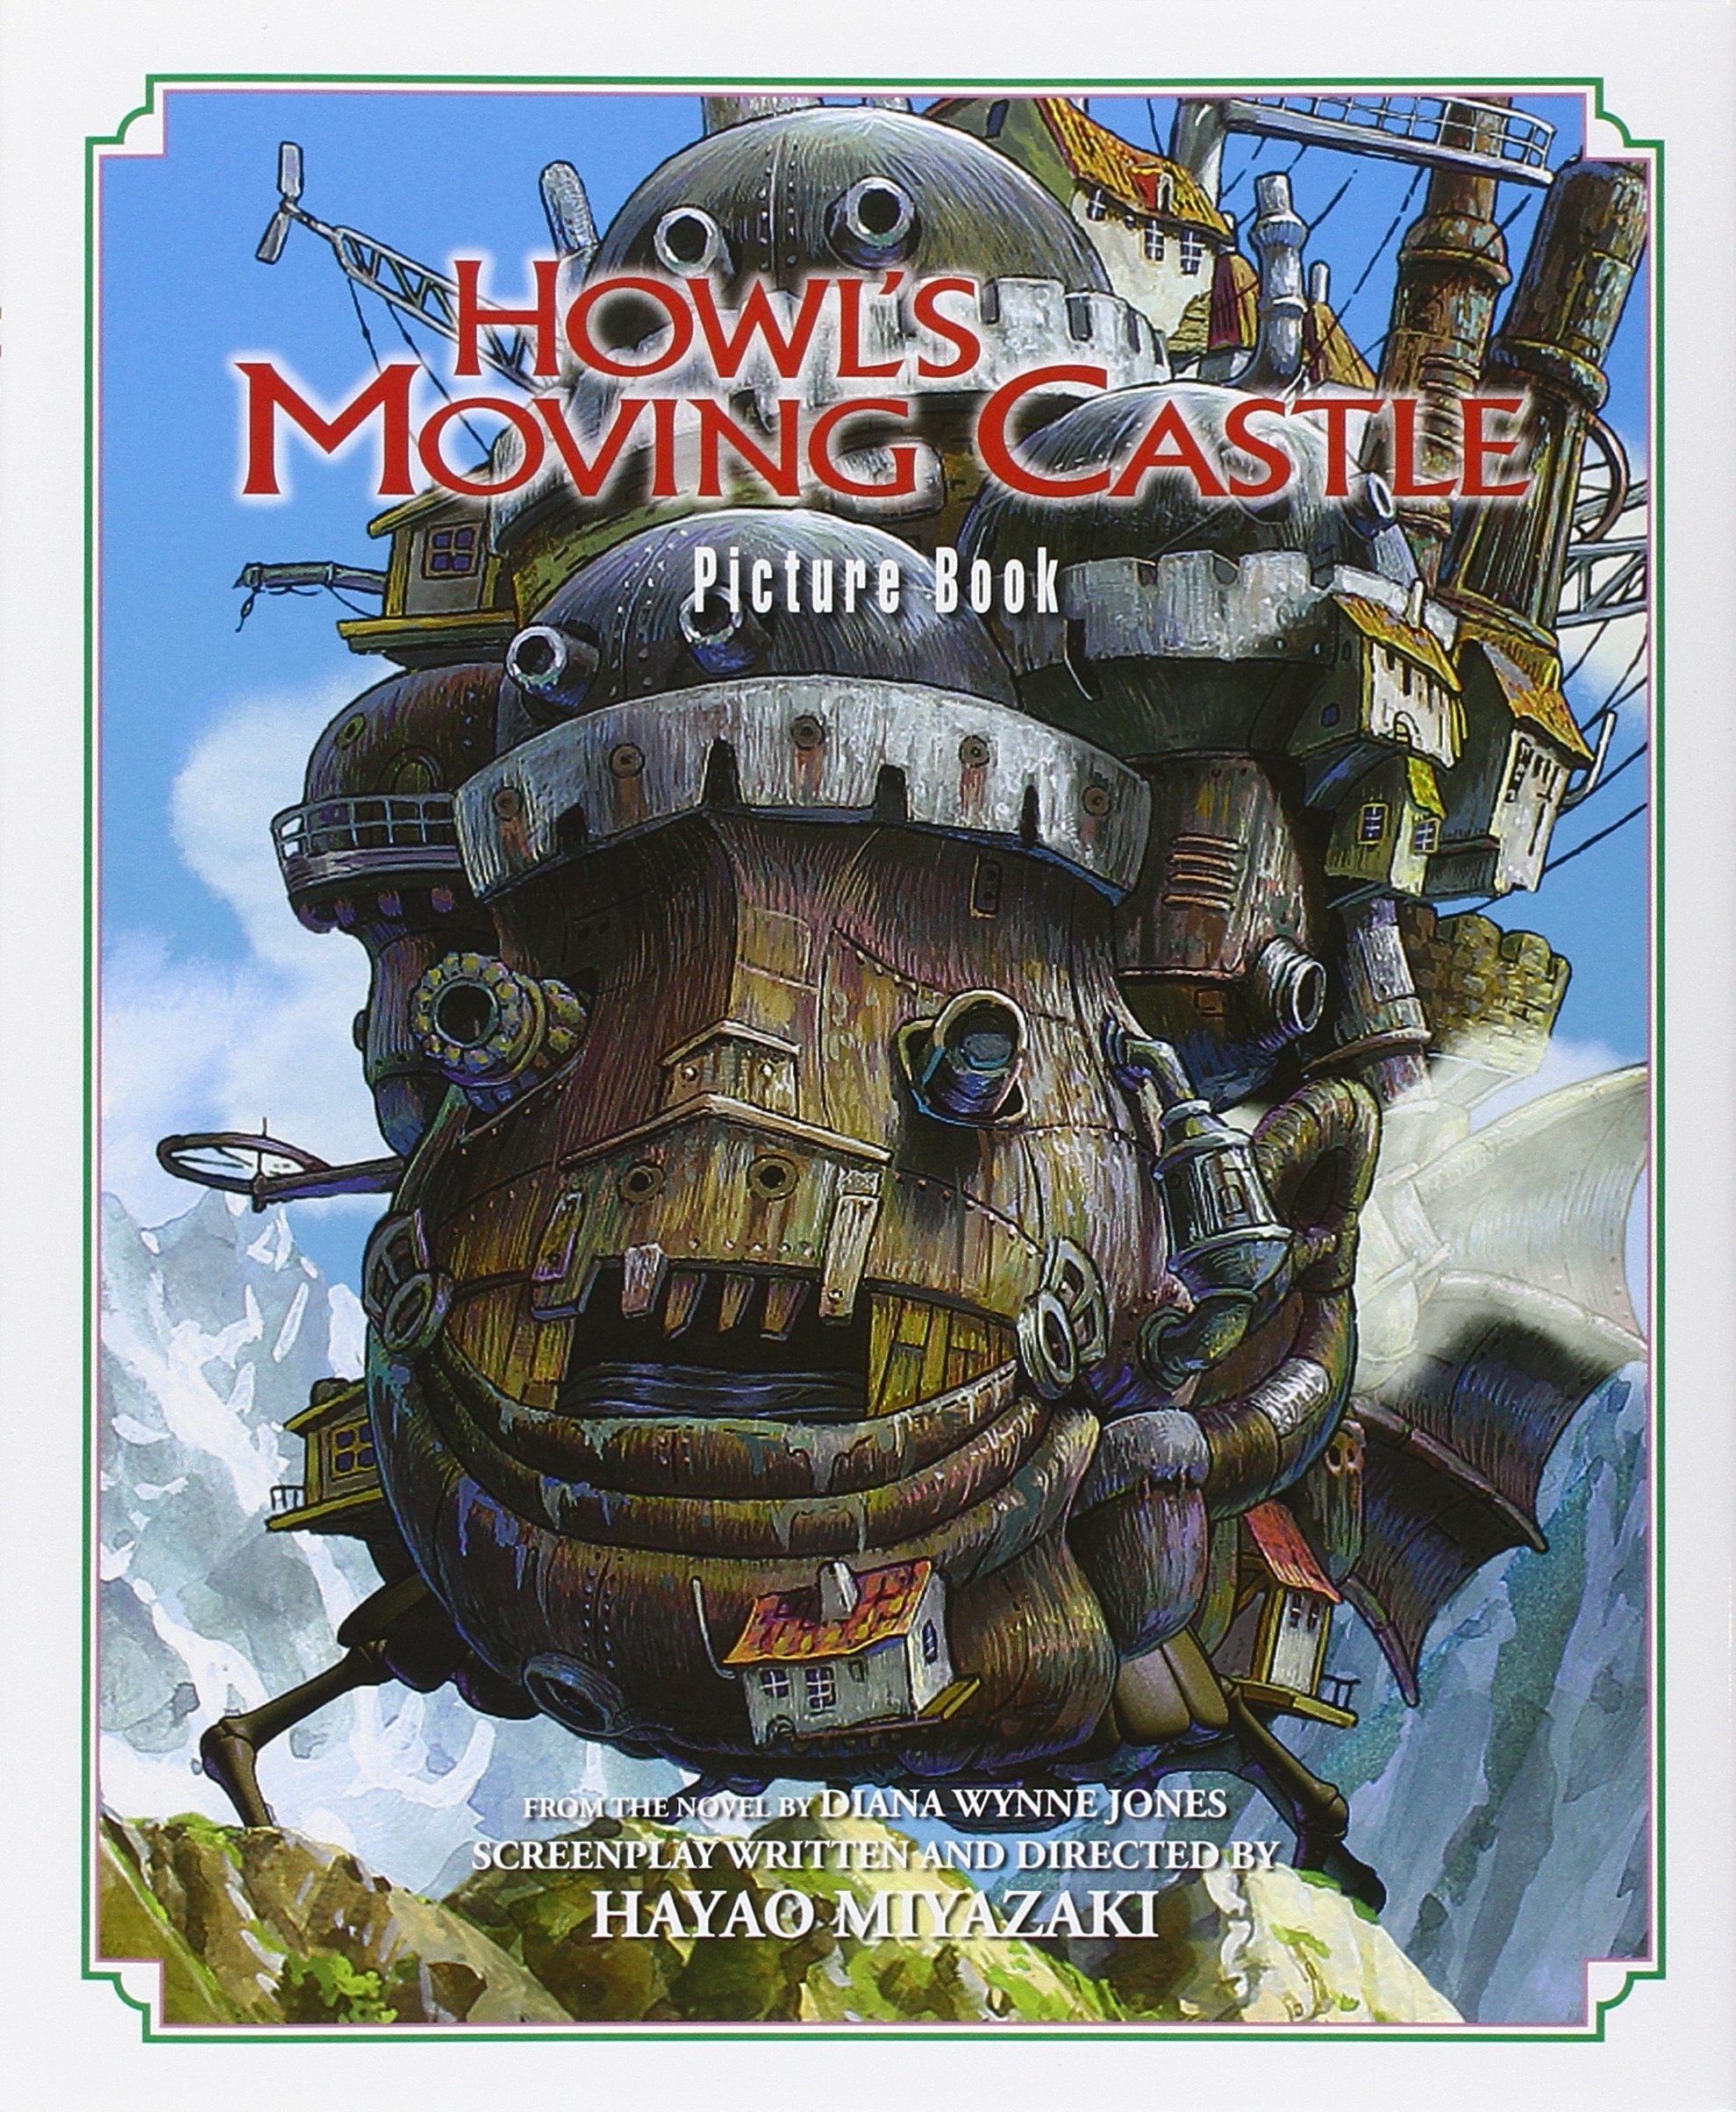 Studio Ghibli - Howl's Moving Castle Picture Book